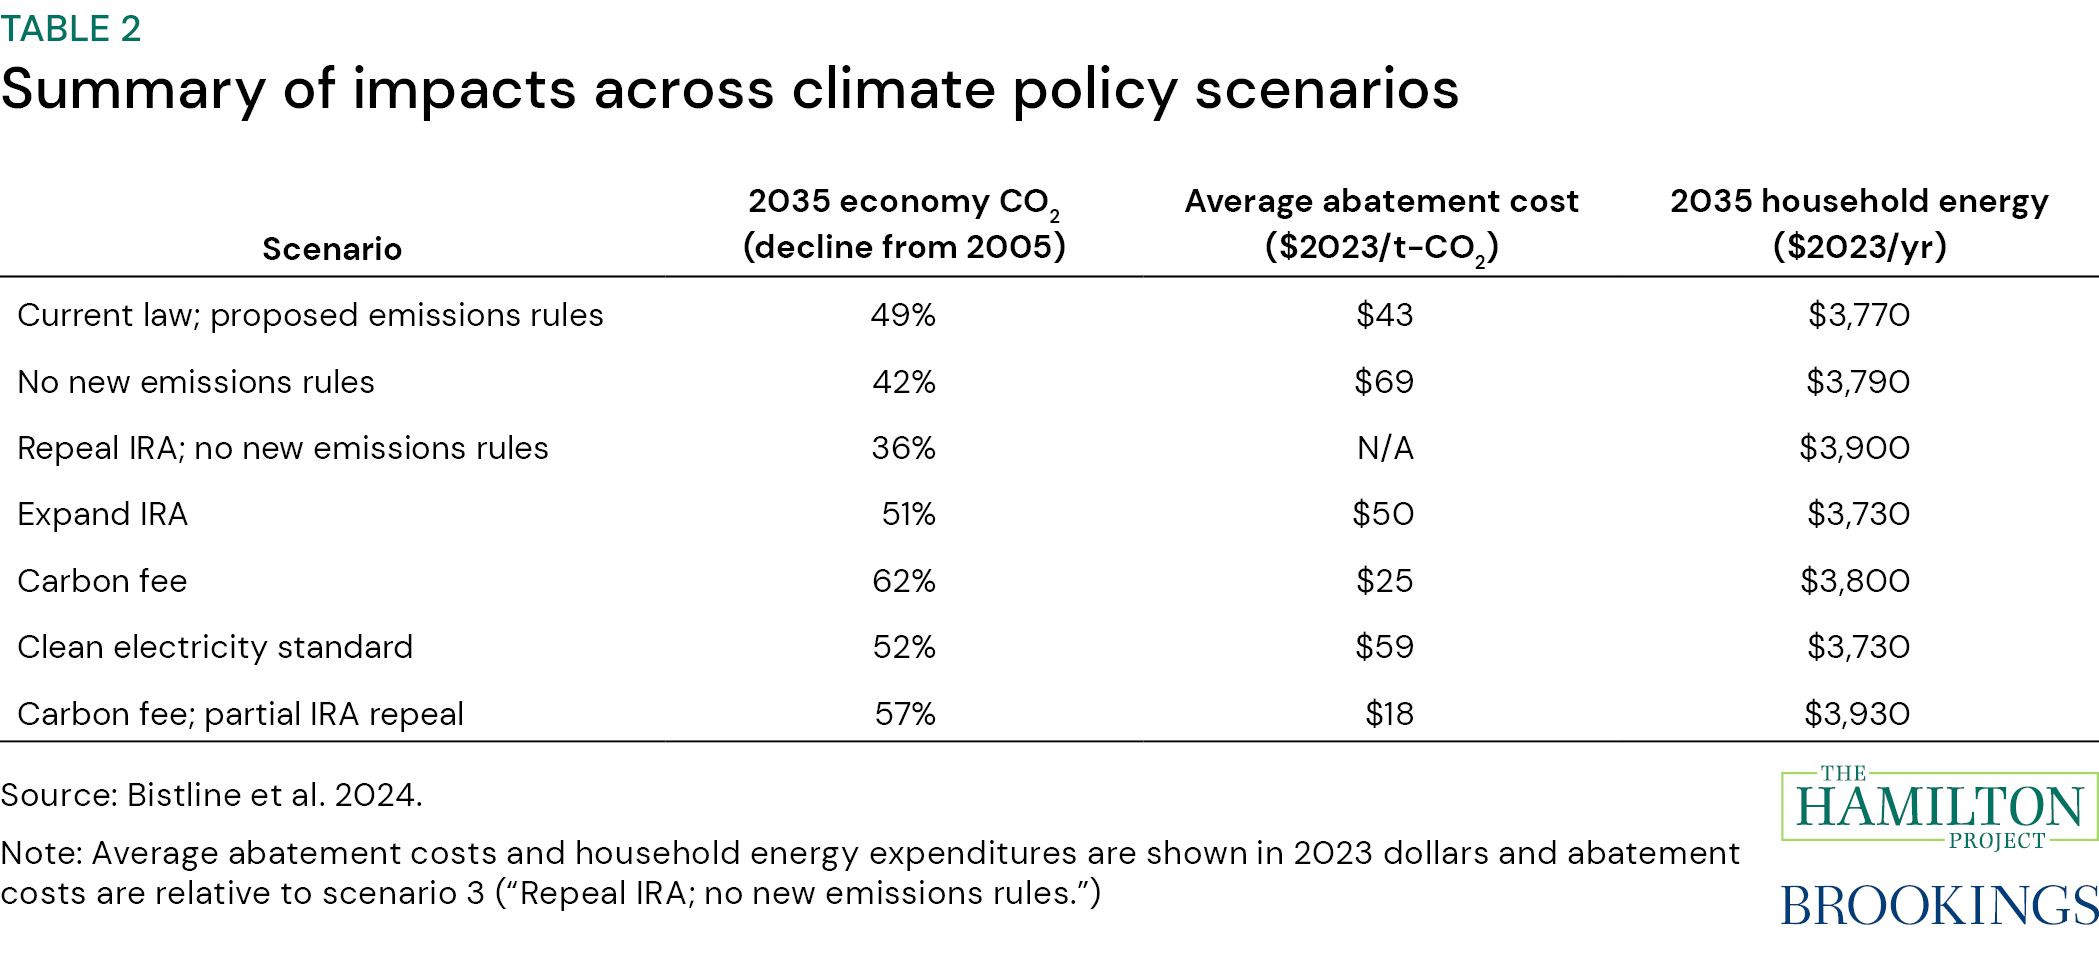 Table 2: Summary of impacts across climate policy scenarios, with columns for 2035 economy carbon dioxide, average abatement cost, and 2035 household energy